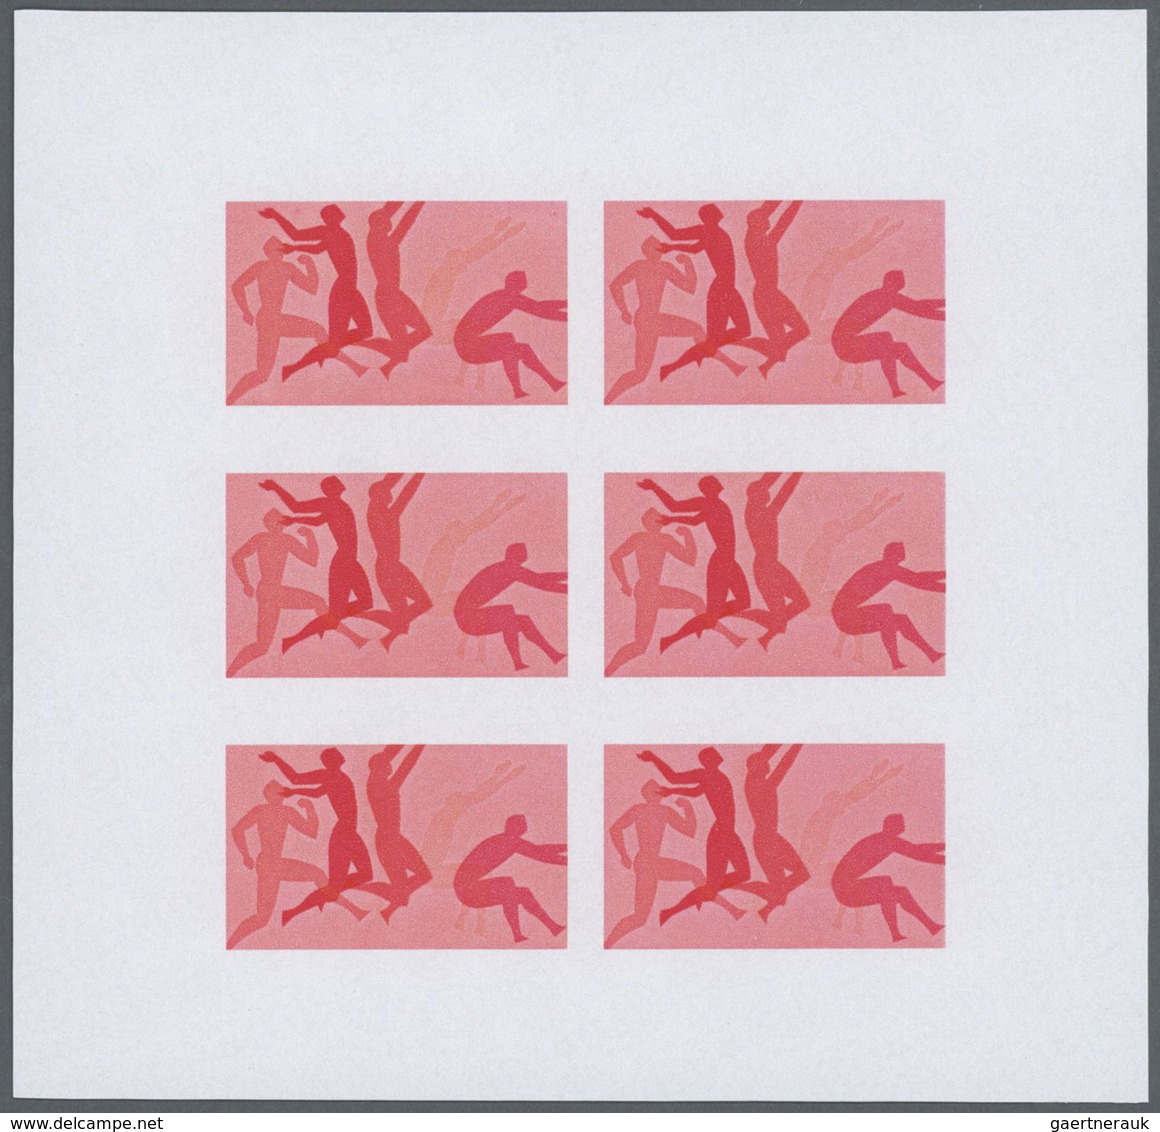 Thematik: Olympische Spiele / olympic games: 1976, Penrhyn. Progressive proofs set of sheets for the